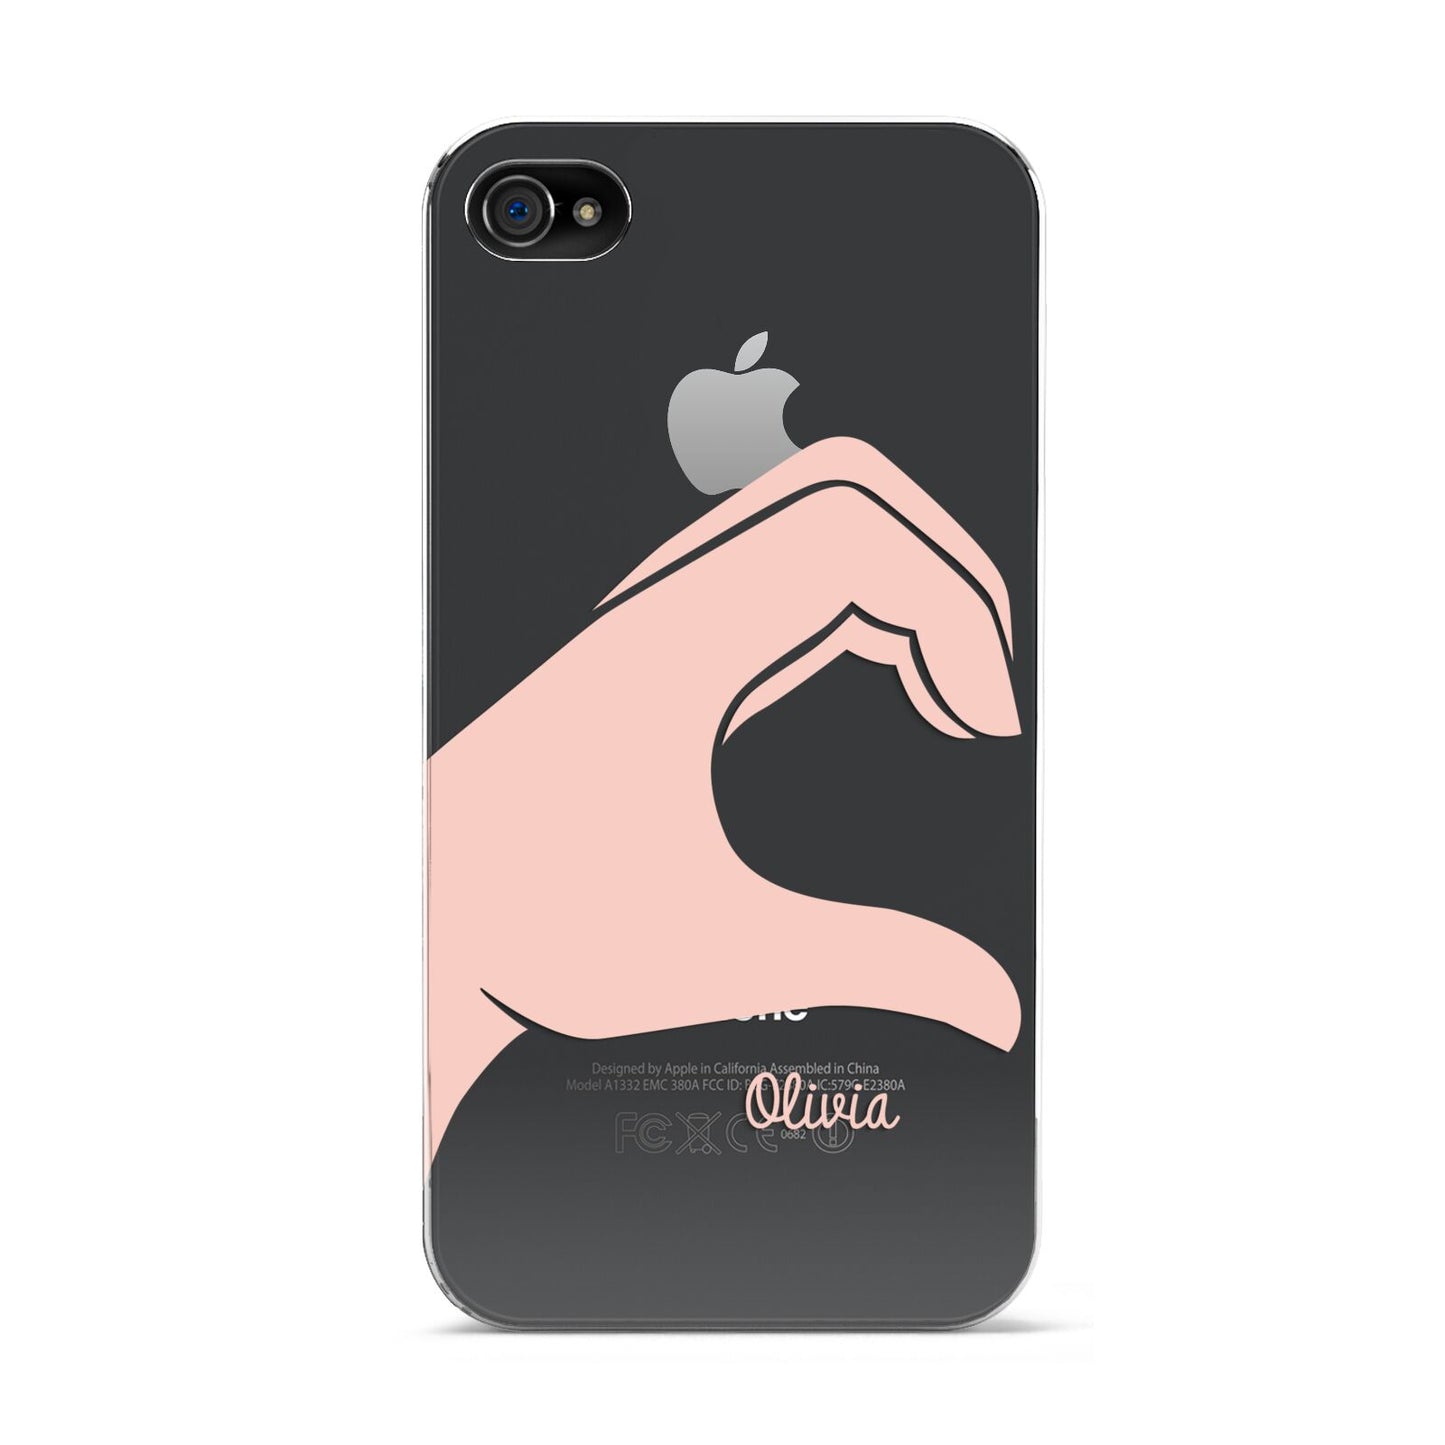 Left Hand in Half Heart with Name Apple iPhone 4s Case